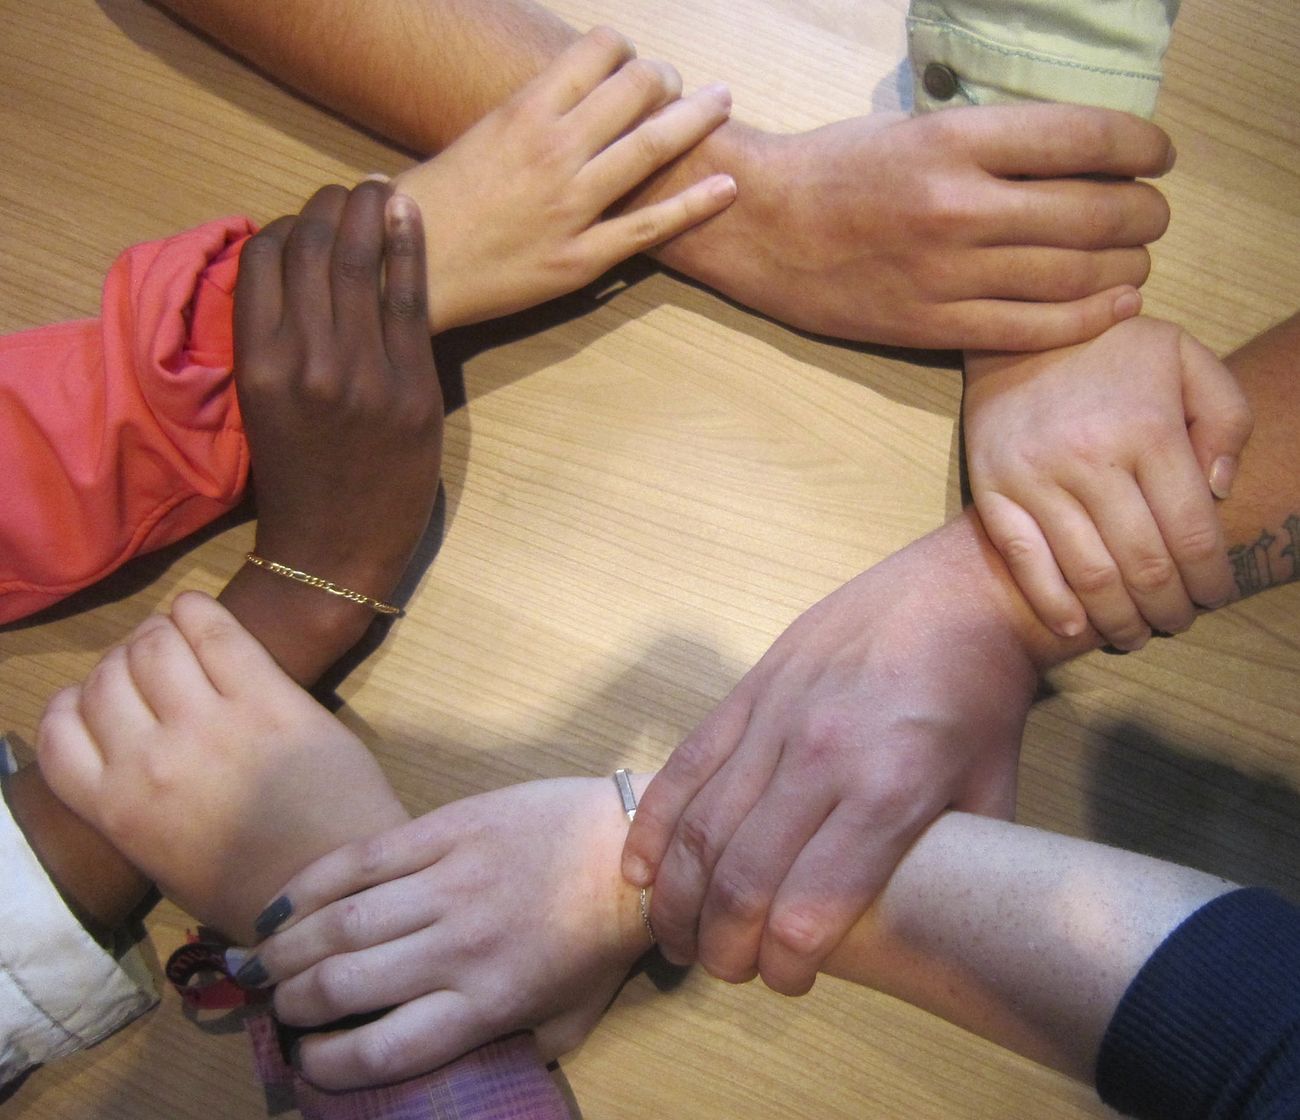 Free people joining hands image